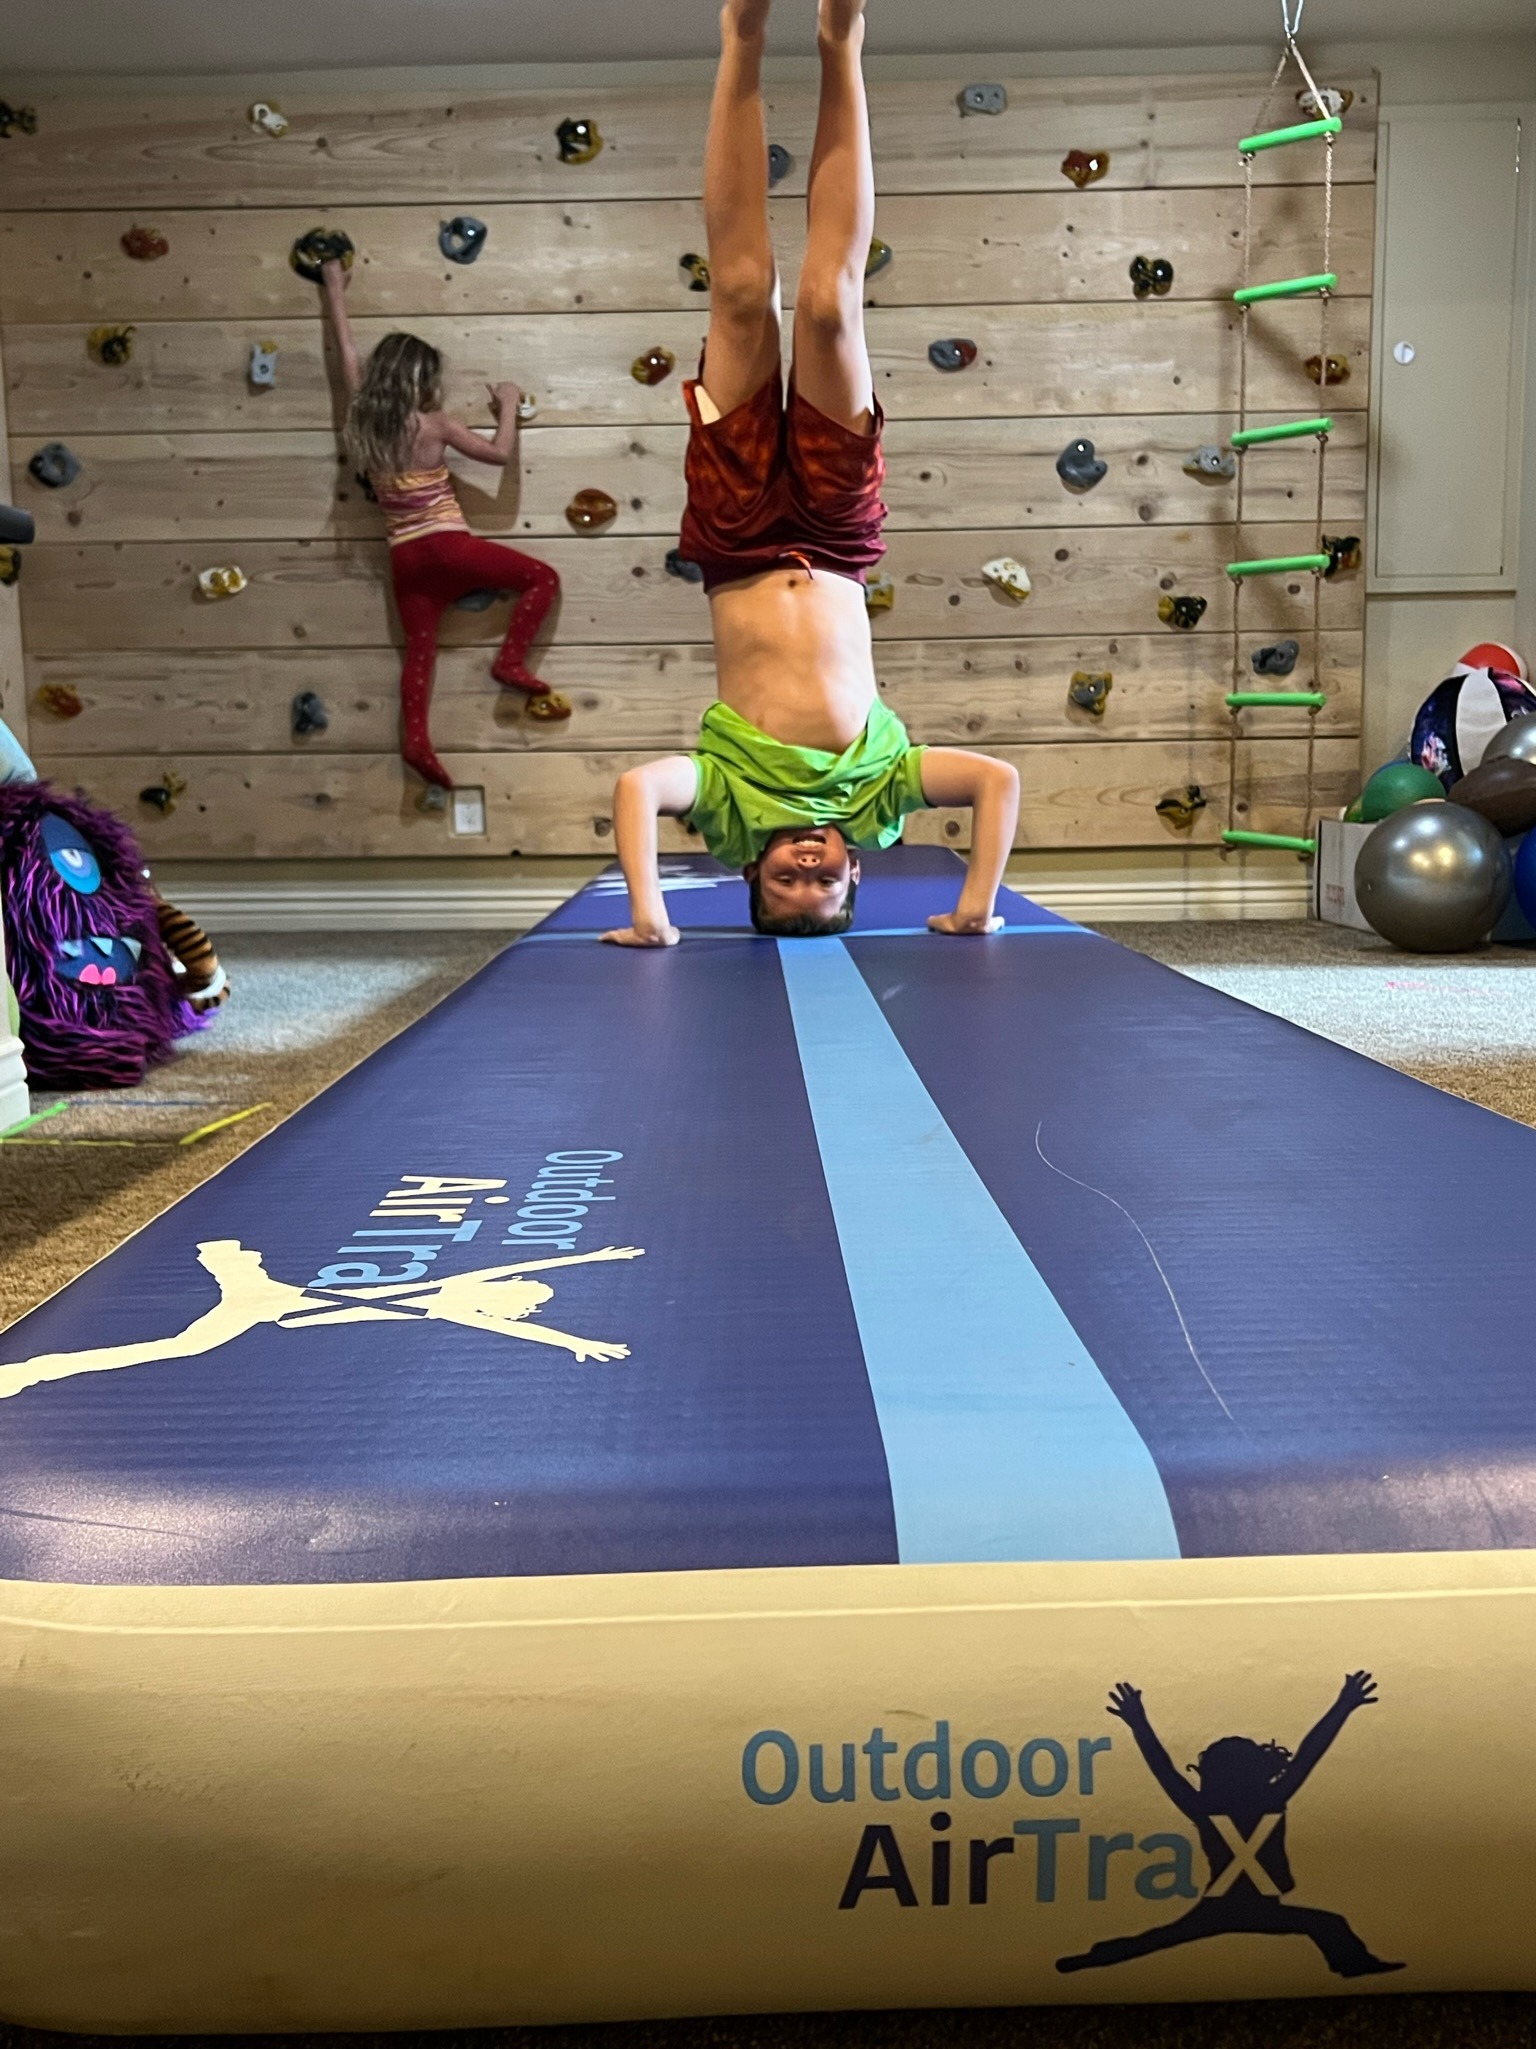 man does head stand on Outdoor Air track